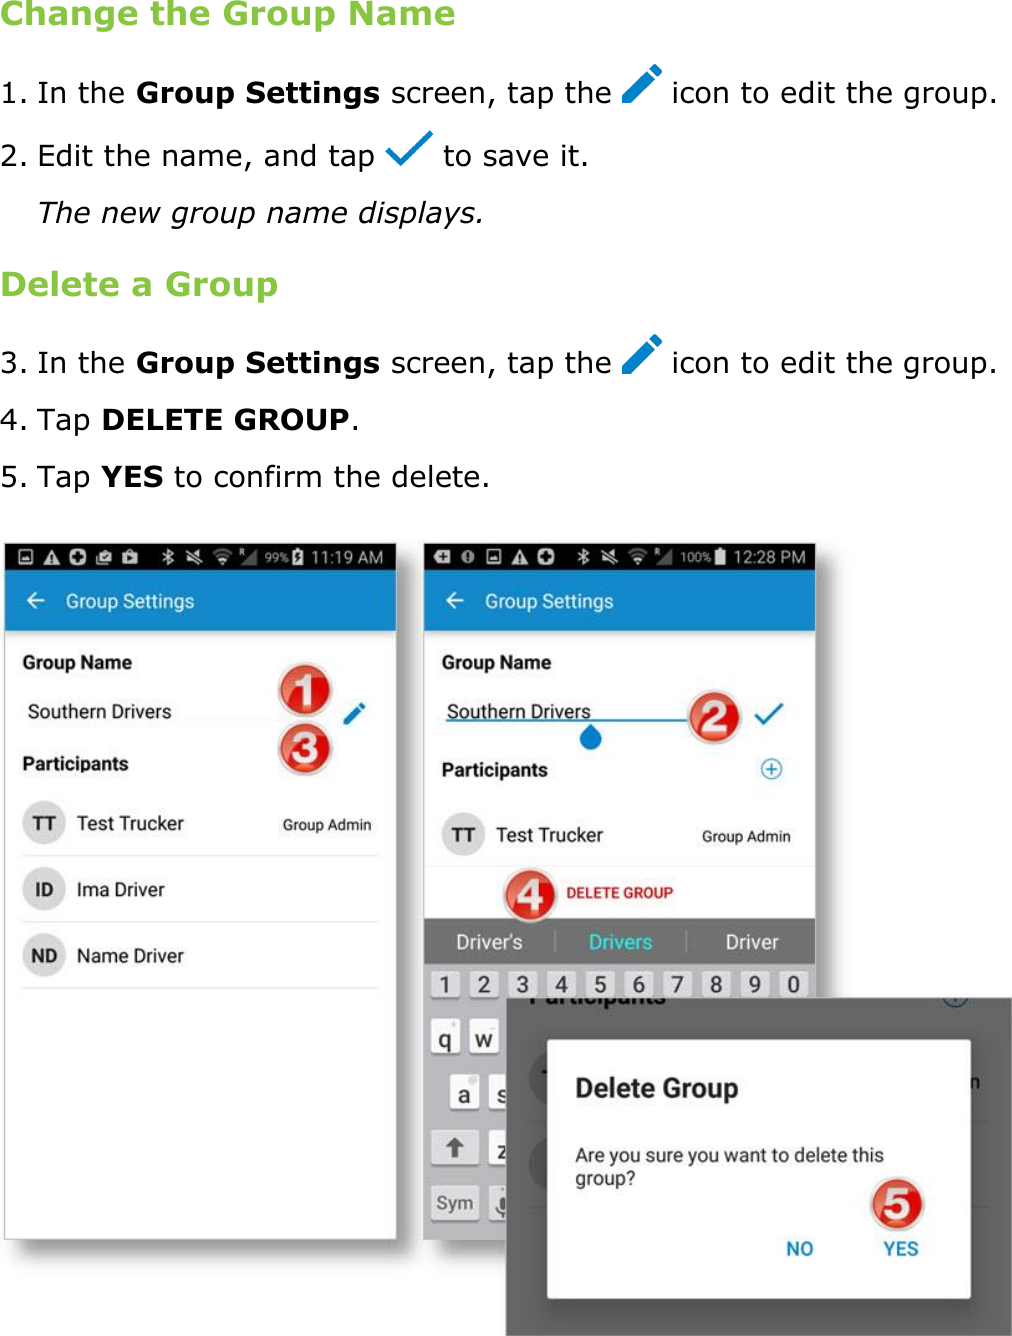 Send Messages, Forms, and Workflows DriverConnect User Guide  74 © 2016-2017, Rand McNally, Inc. Change the Group Name 1. In the Group Settings screen, tap the   icon to edit the group. 2. Edit the name, and tap   to save it. The new group name displays. Delete a Group 3. In the Group Settings screen, tap the   icon to edit the group. 4. Tap DELETE GROUP. 5. Tap YES to confirm the delete.  